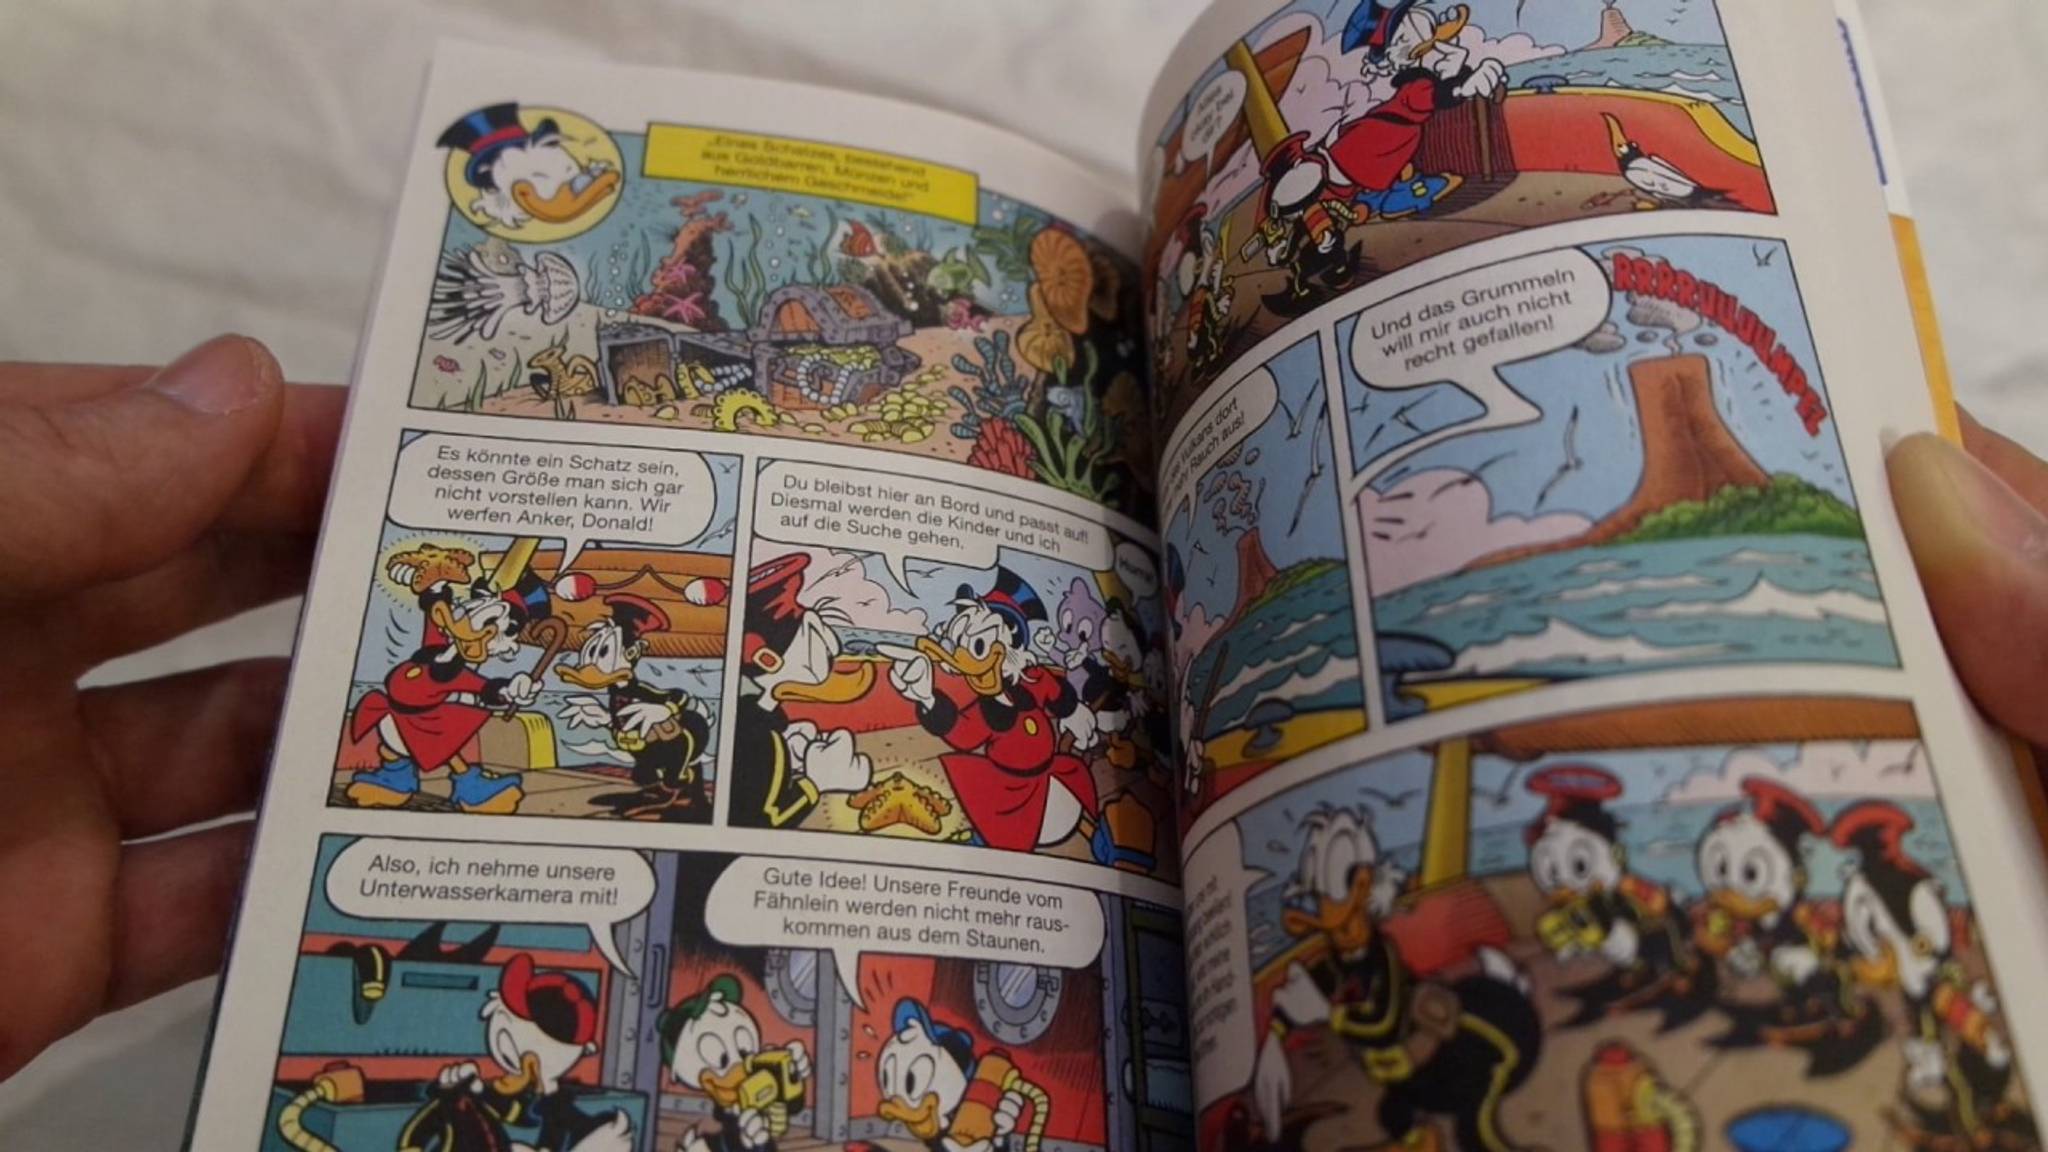 Donald Duck breaks foreign German stereotypes